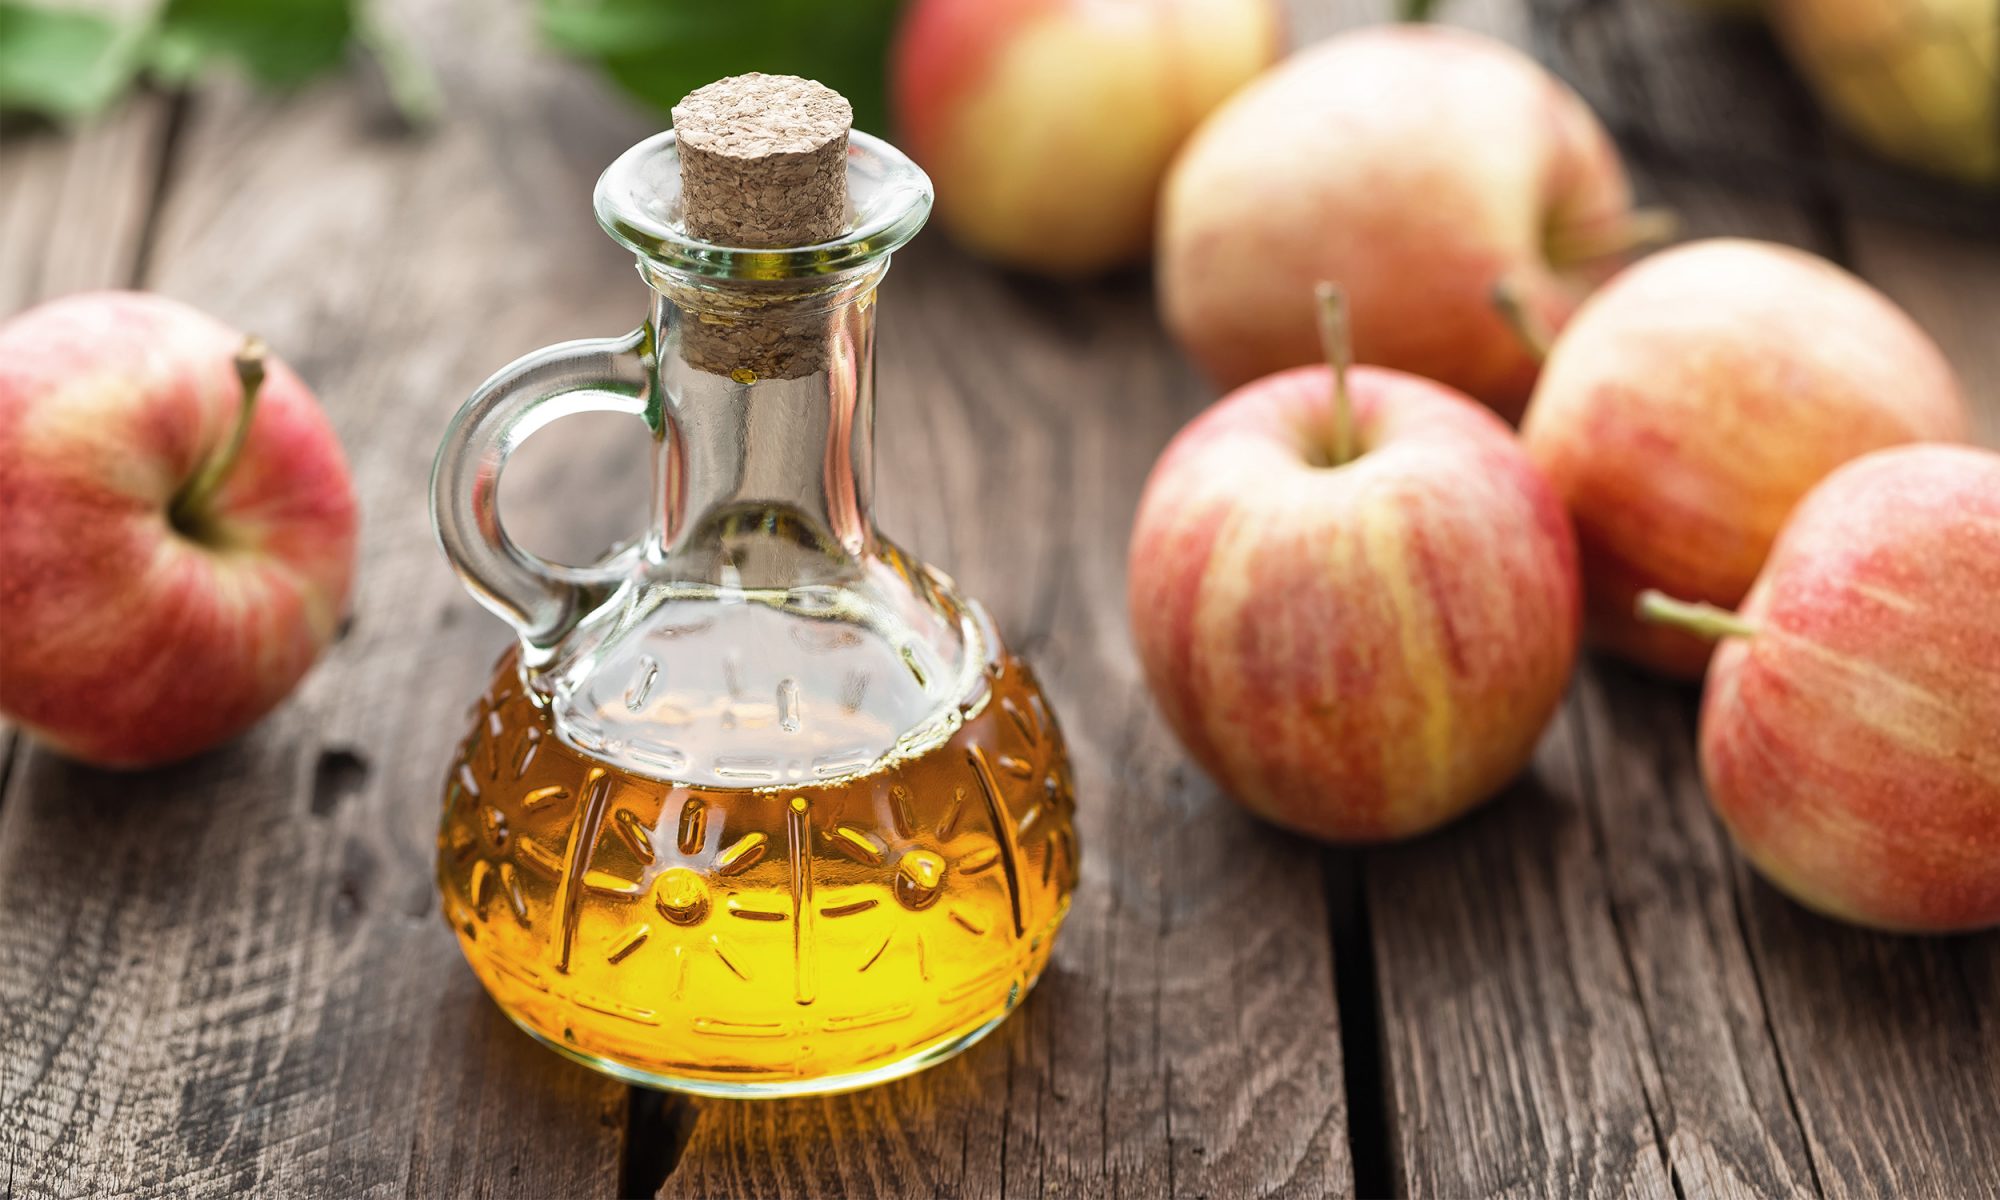 EC: What Are the Health Benefits of Apple Cider Vinegar?